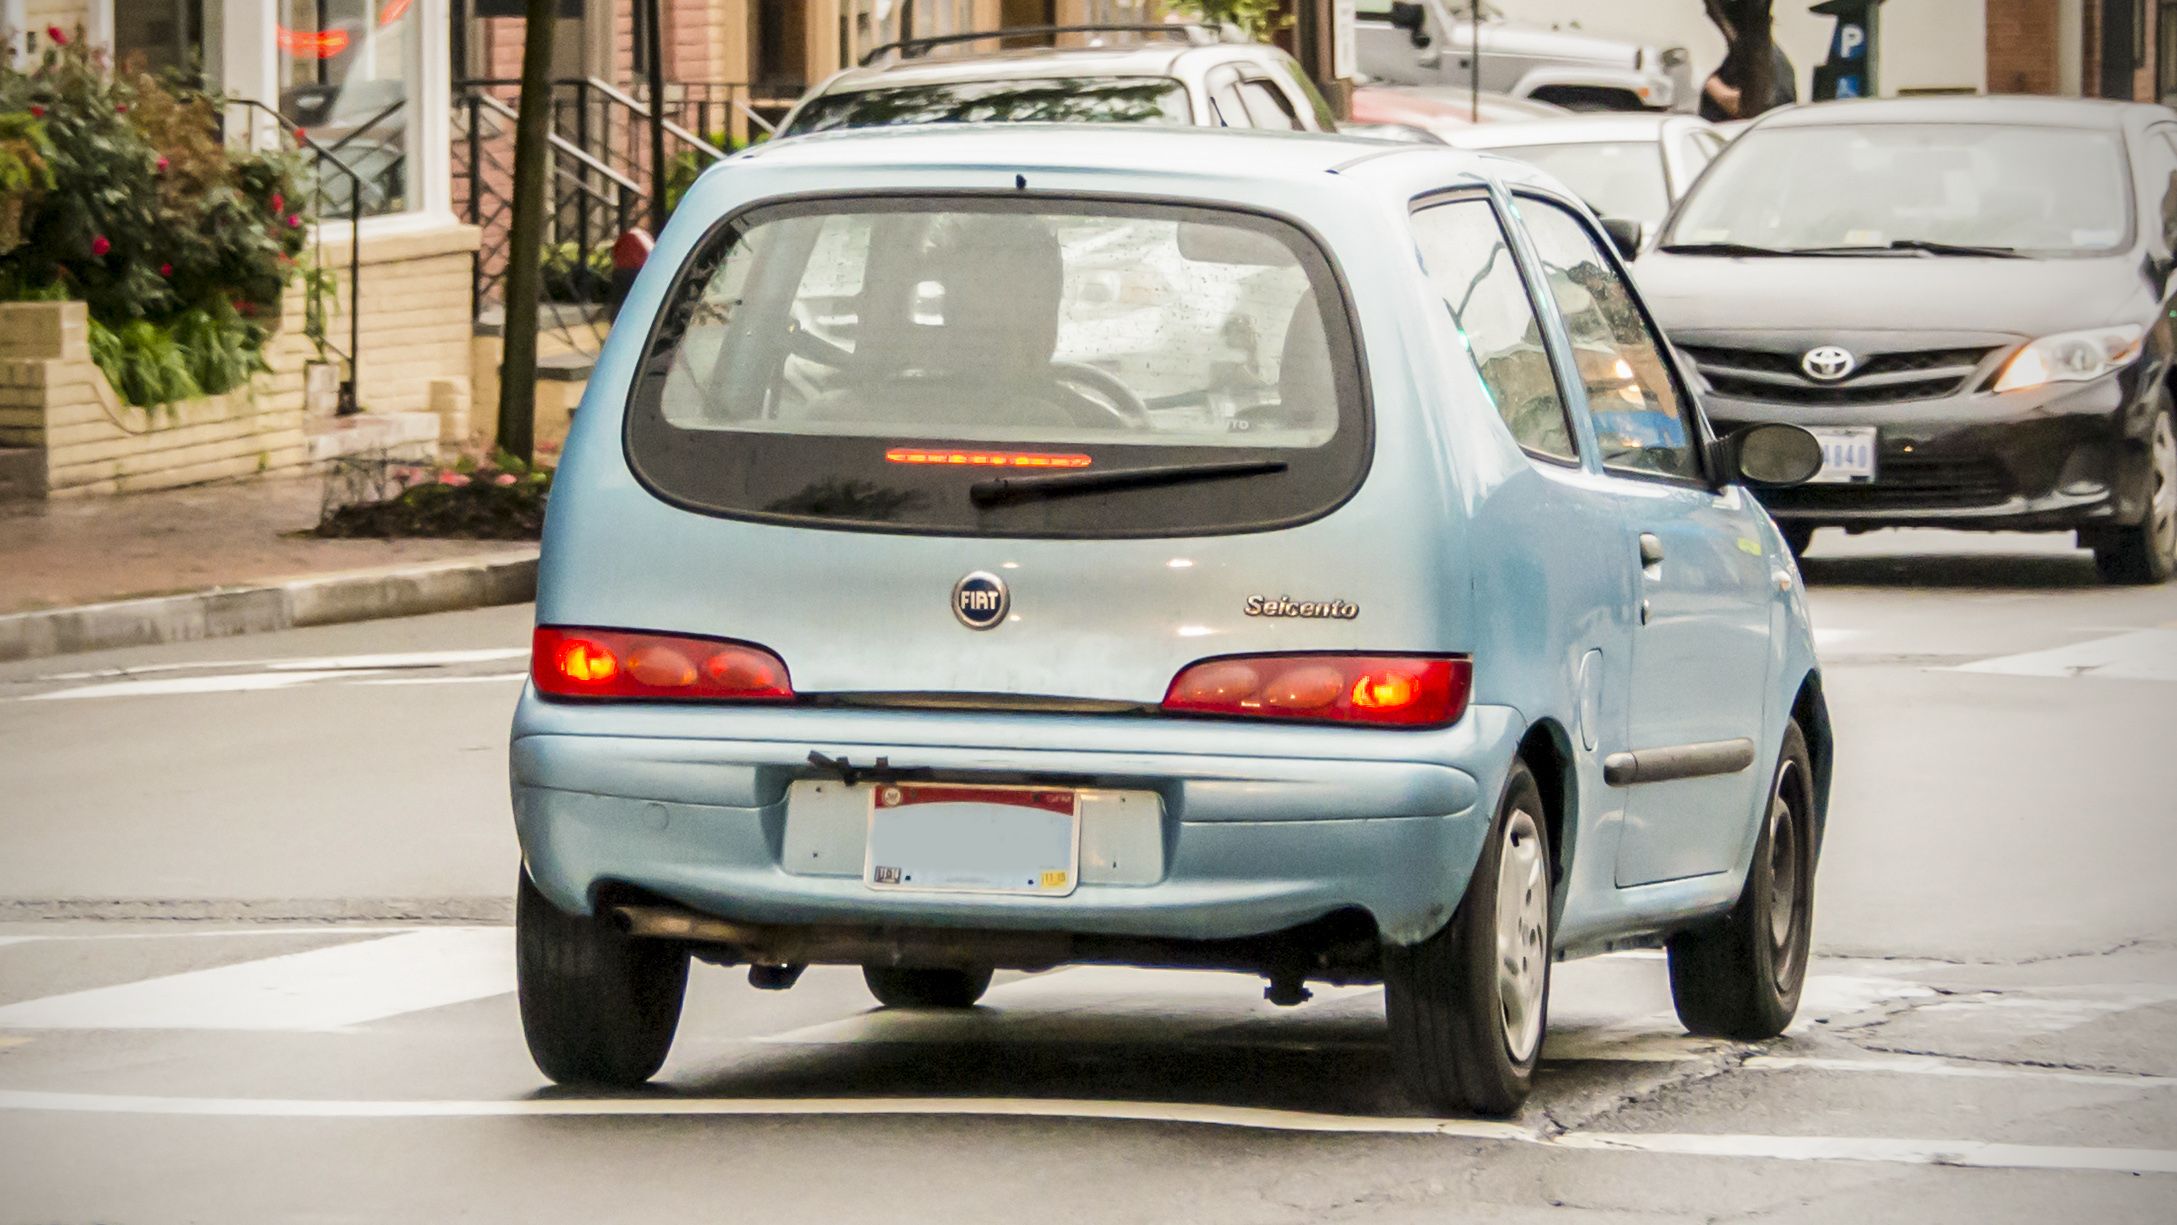 Fiat Seicento spotted in the US: the predecessors of the current Fiat 500